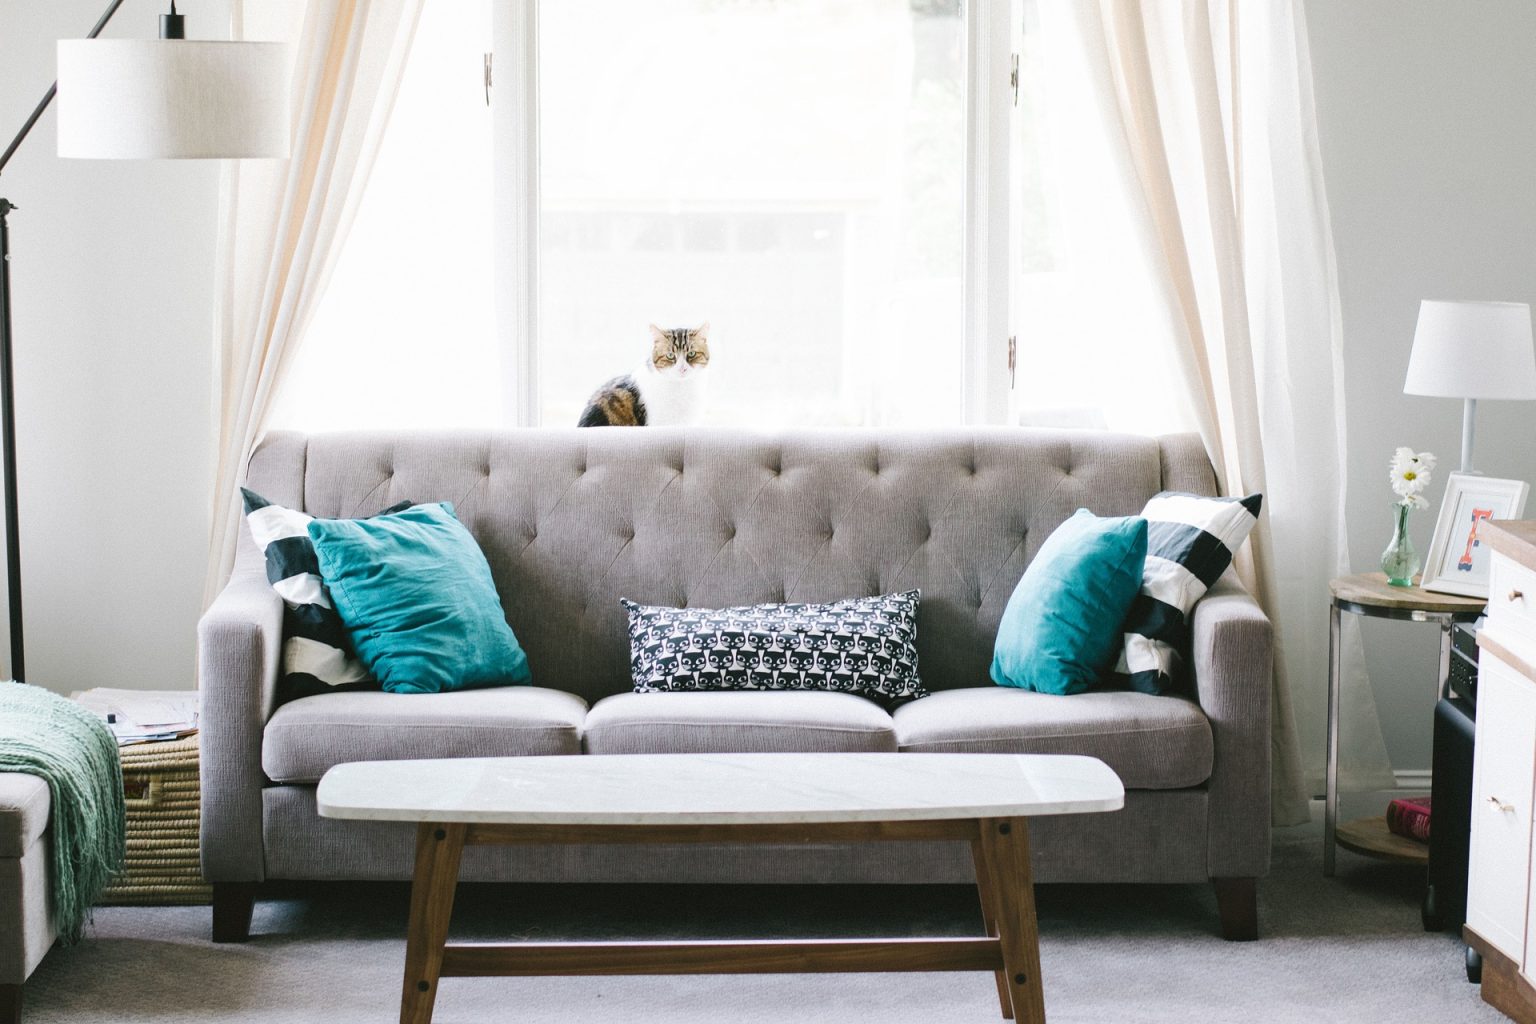 How to Clean a Corner Sofa by Yourself at Home